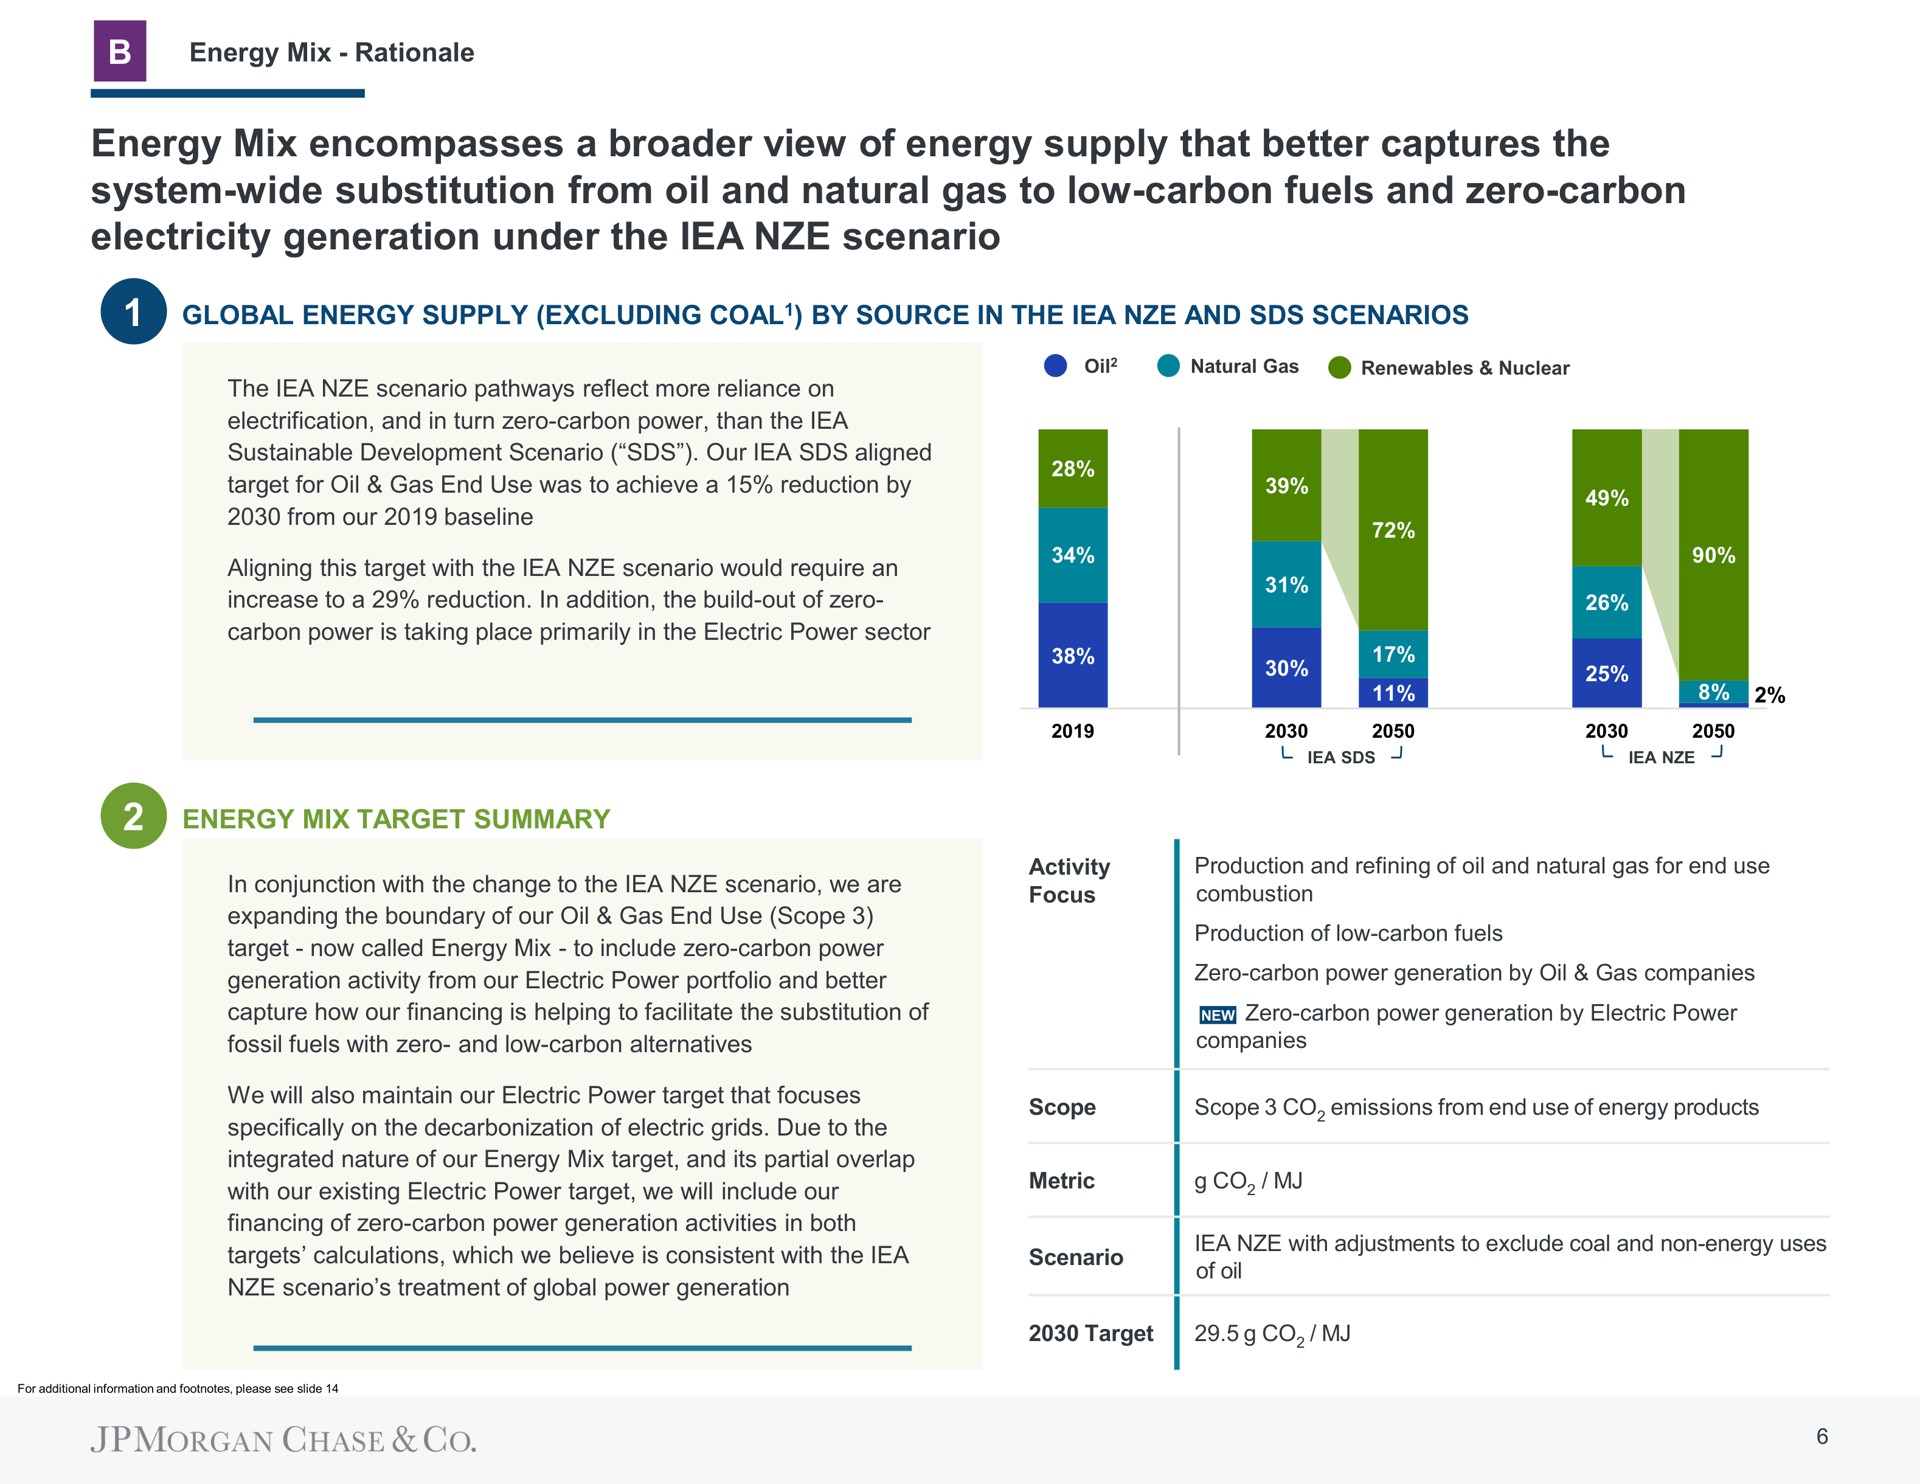 energy mix encompasses a view of energy supply that better captures the system wide substitution from oil and natural gas to low carbon fuels and zero carbon electricity generation under the scenario | J.P.Morgan